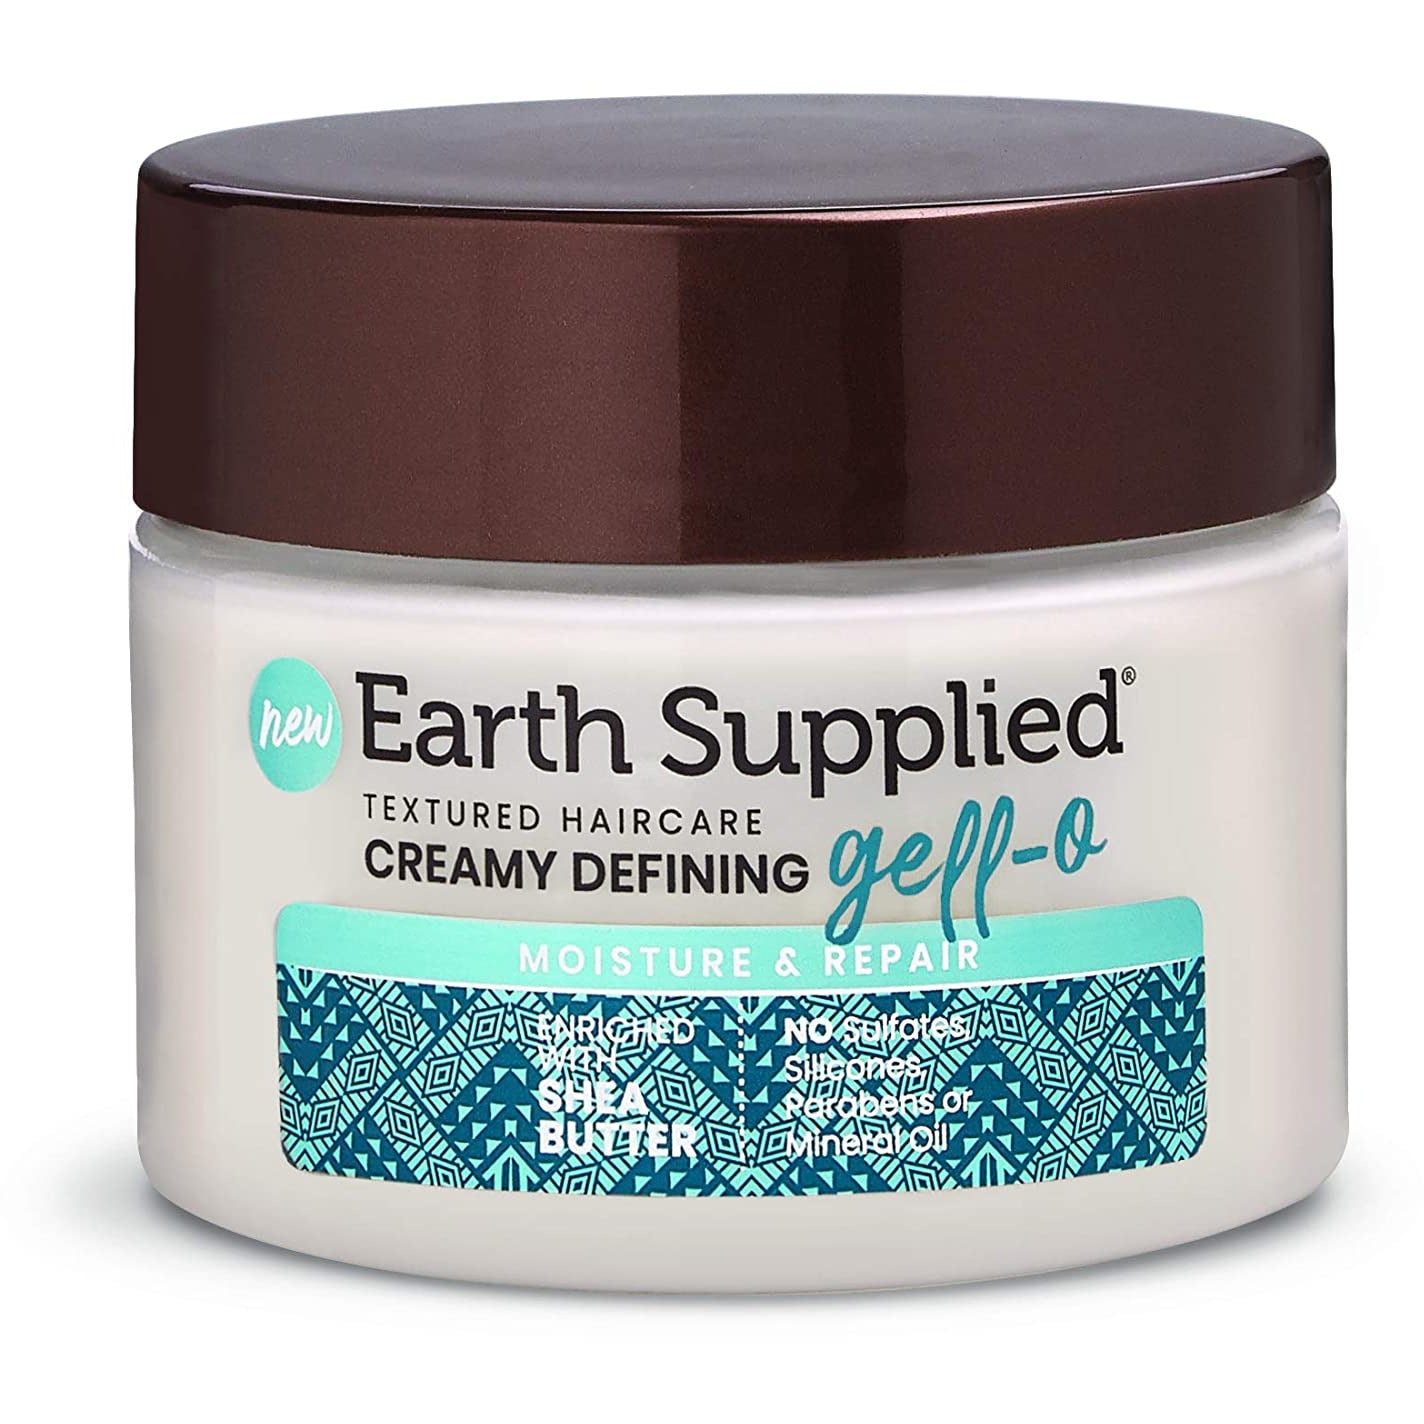 Earth Supplied Creamy Defining Gell-O with Shea Butter 12oz